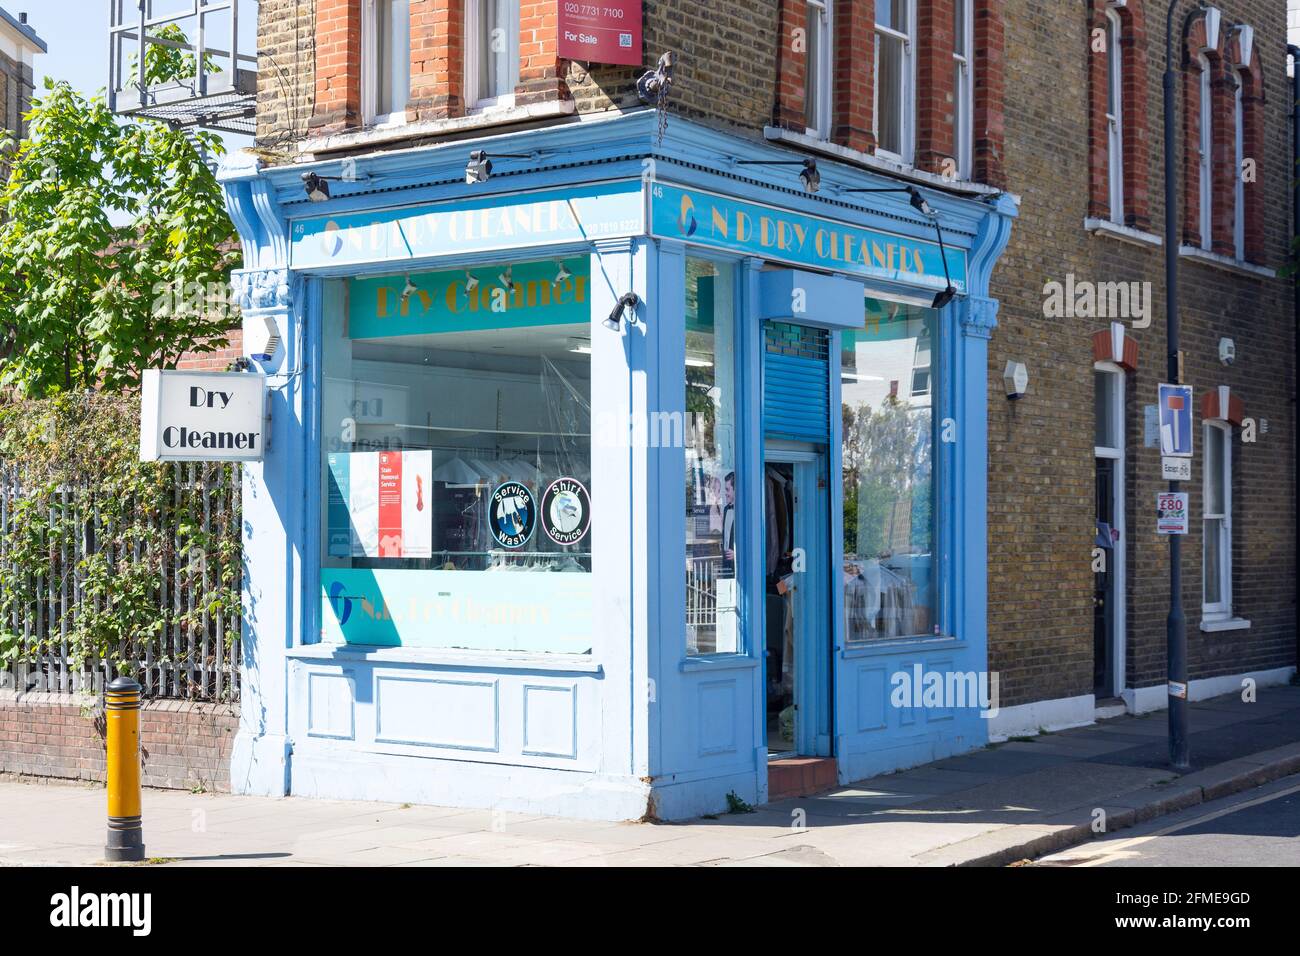 Small dry cleaning shop, Parsons Green Lane, Parsons Green, London Borough of Hammersmith and Fulham, Greater London, England, United Kingdom Stock Photo